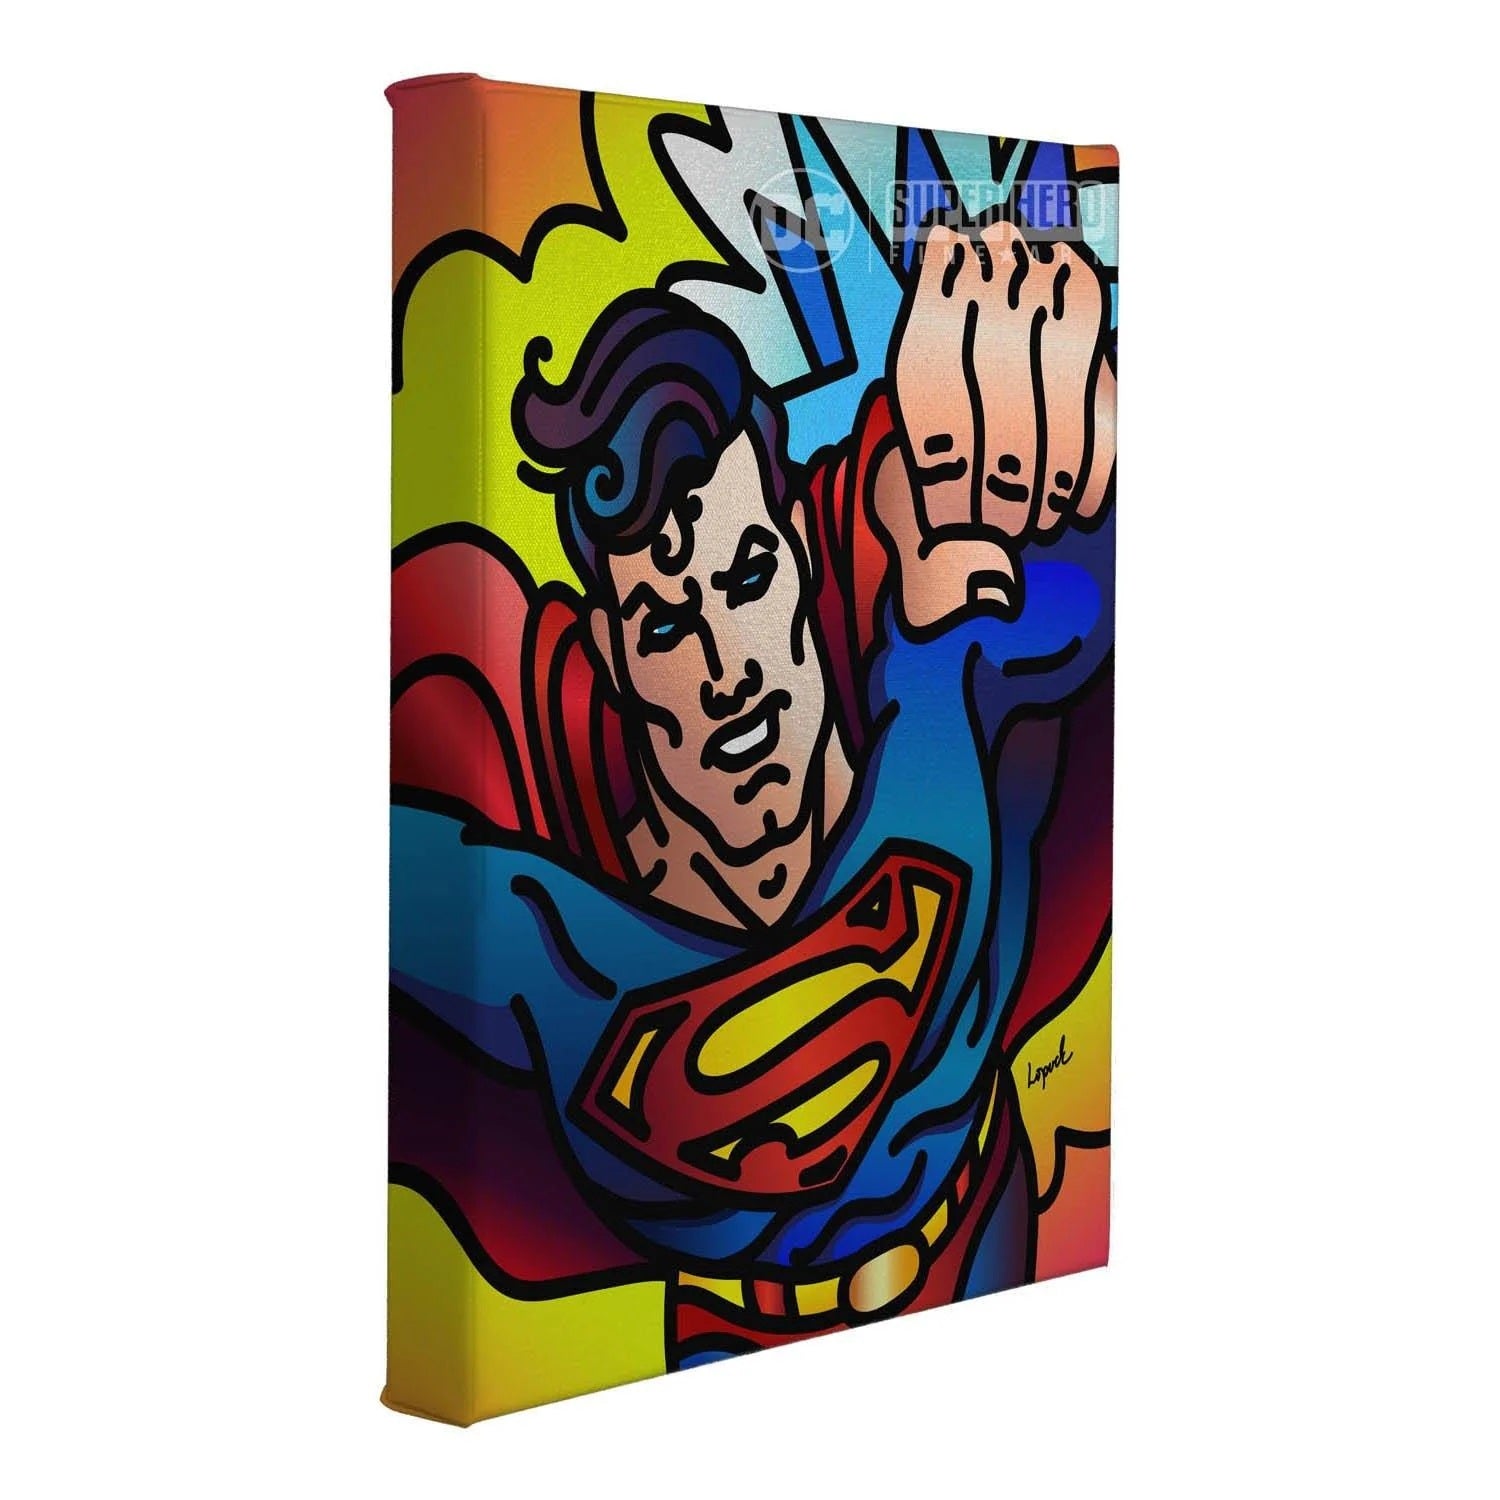 A vibrant portrait of the iconic Superman in all his glory.